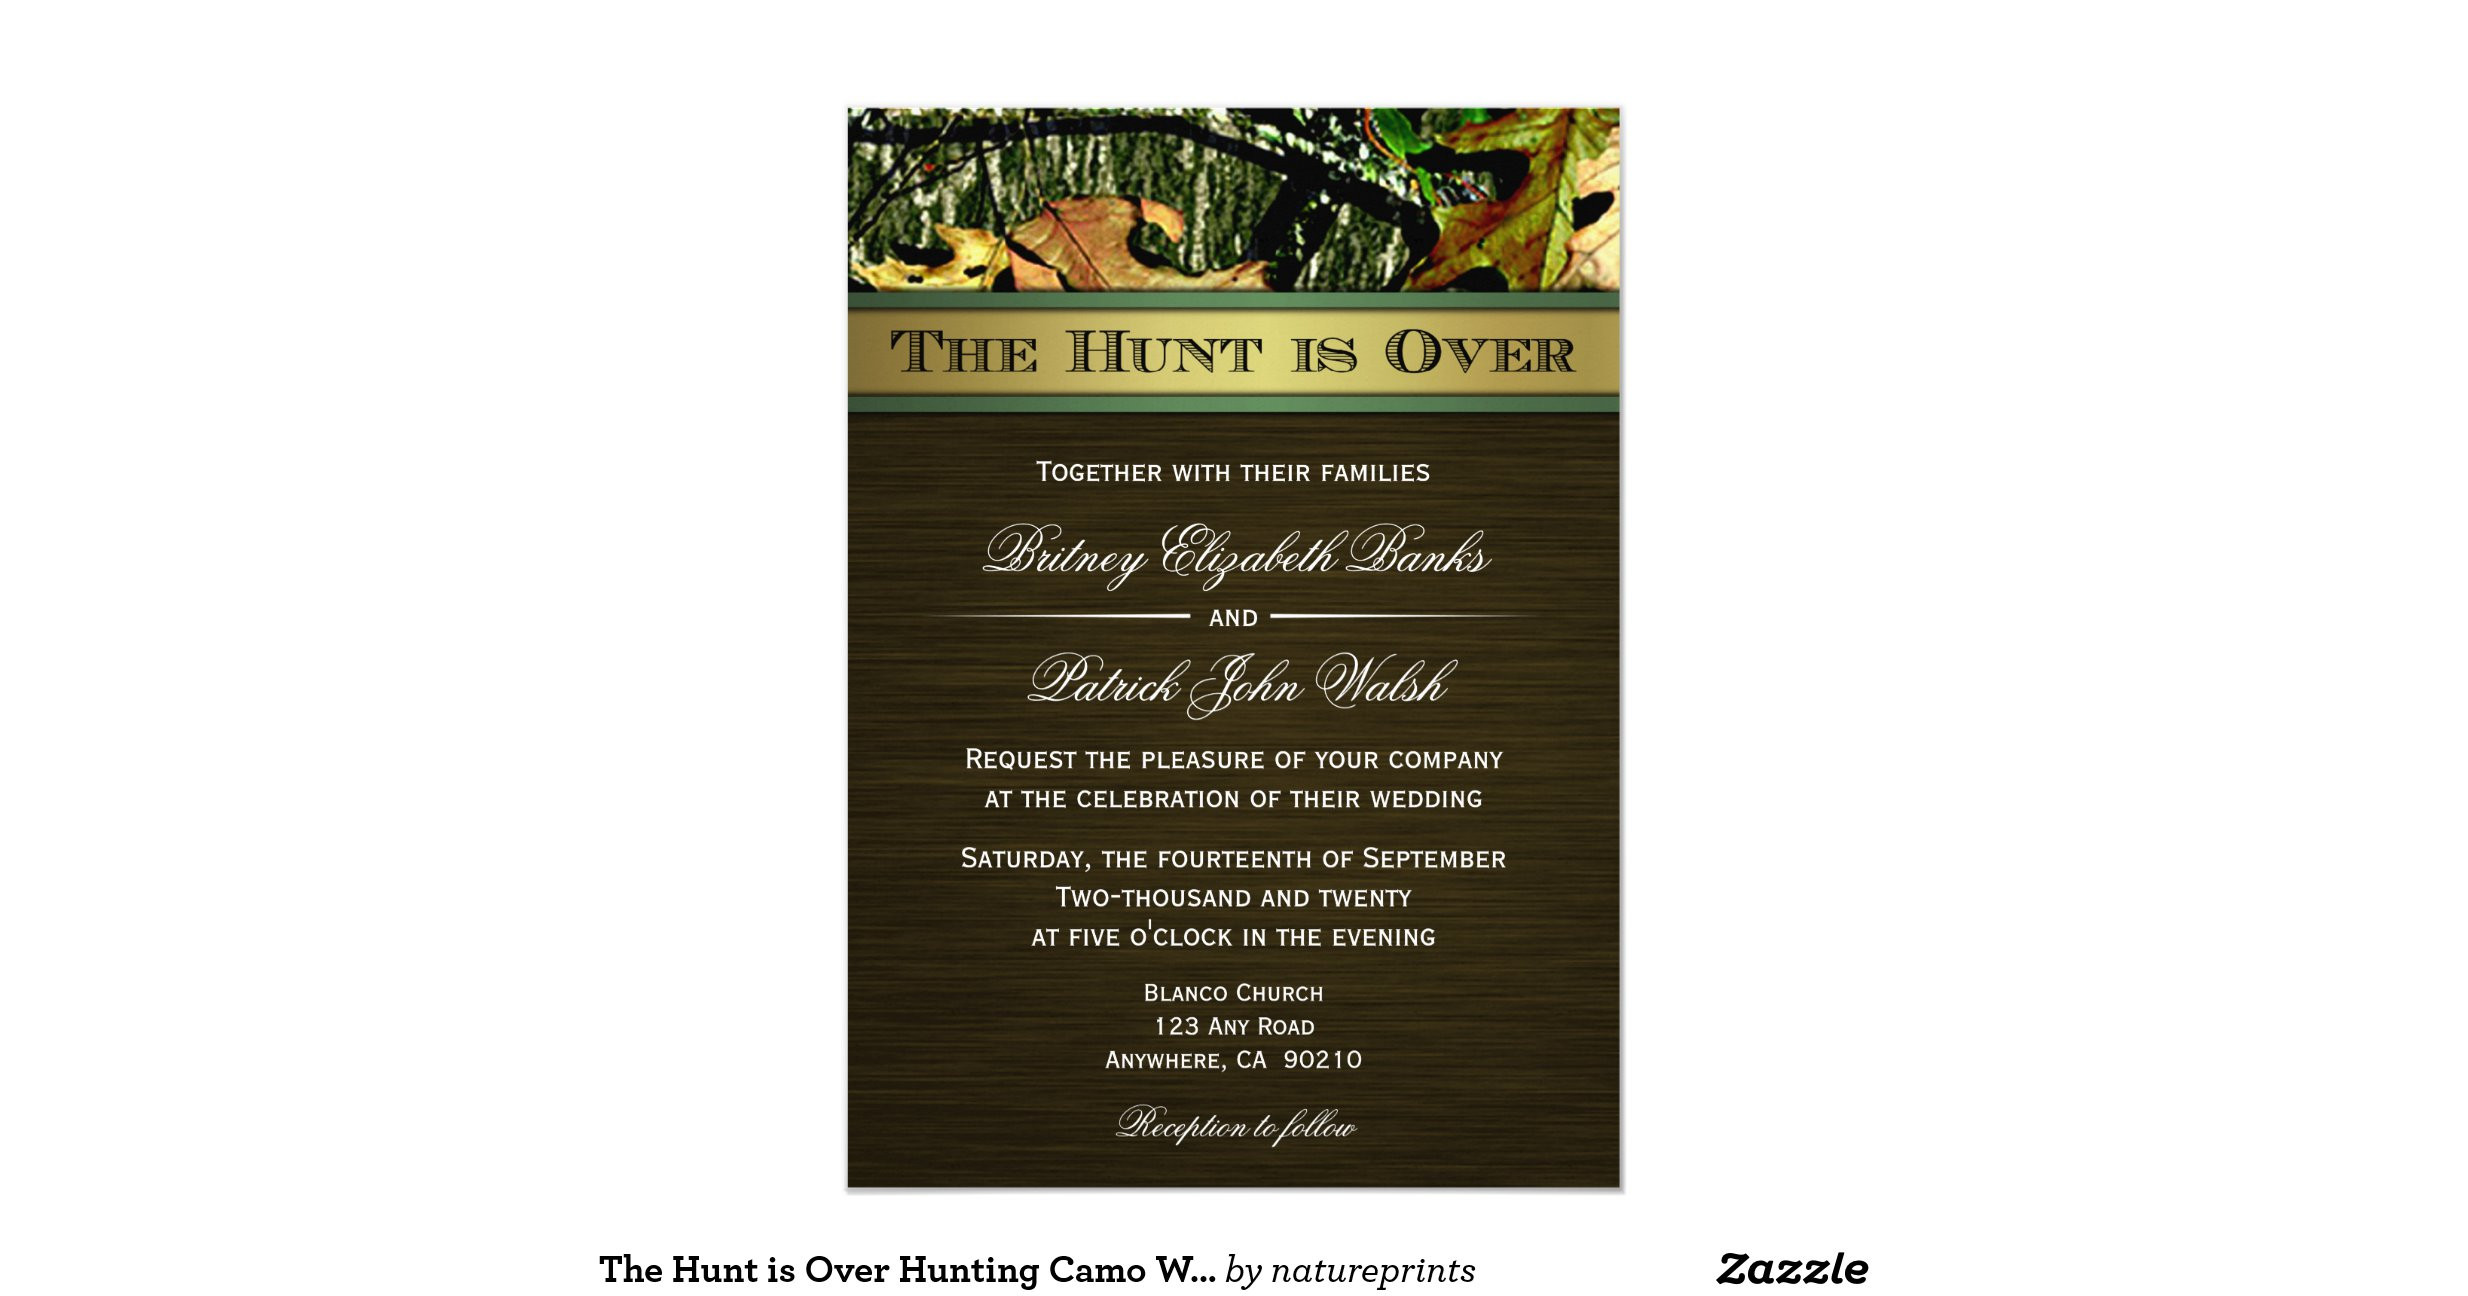 The Hunt Is Over Wedding Invitations
 the hunt is over hunting camo wedding invitations